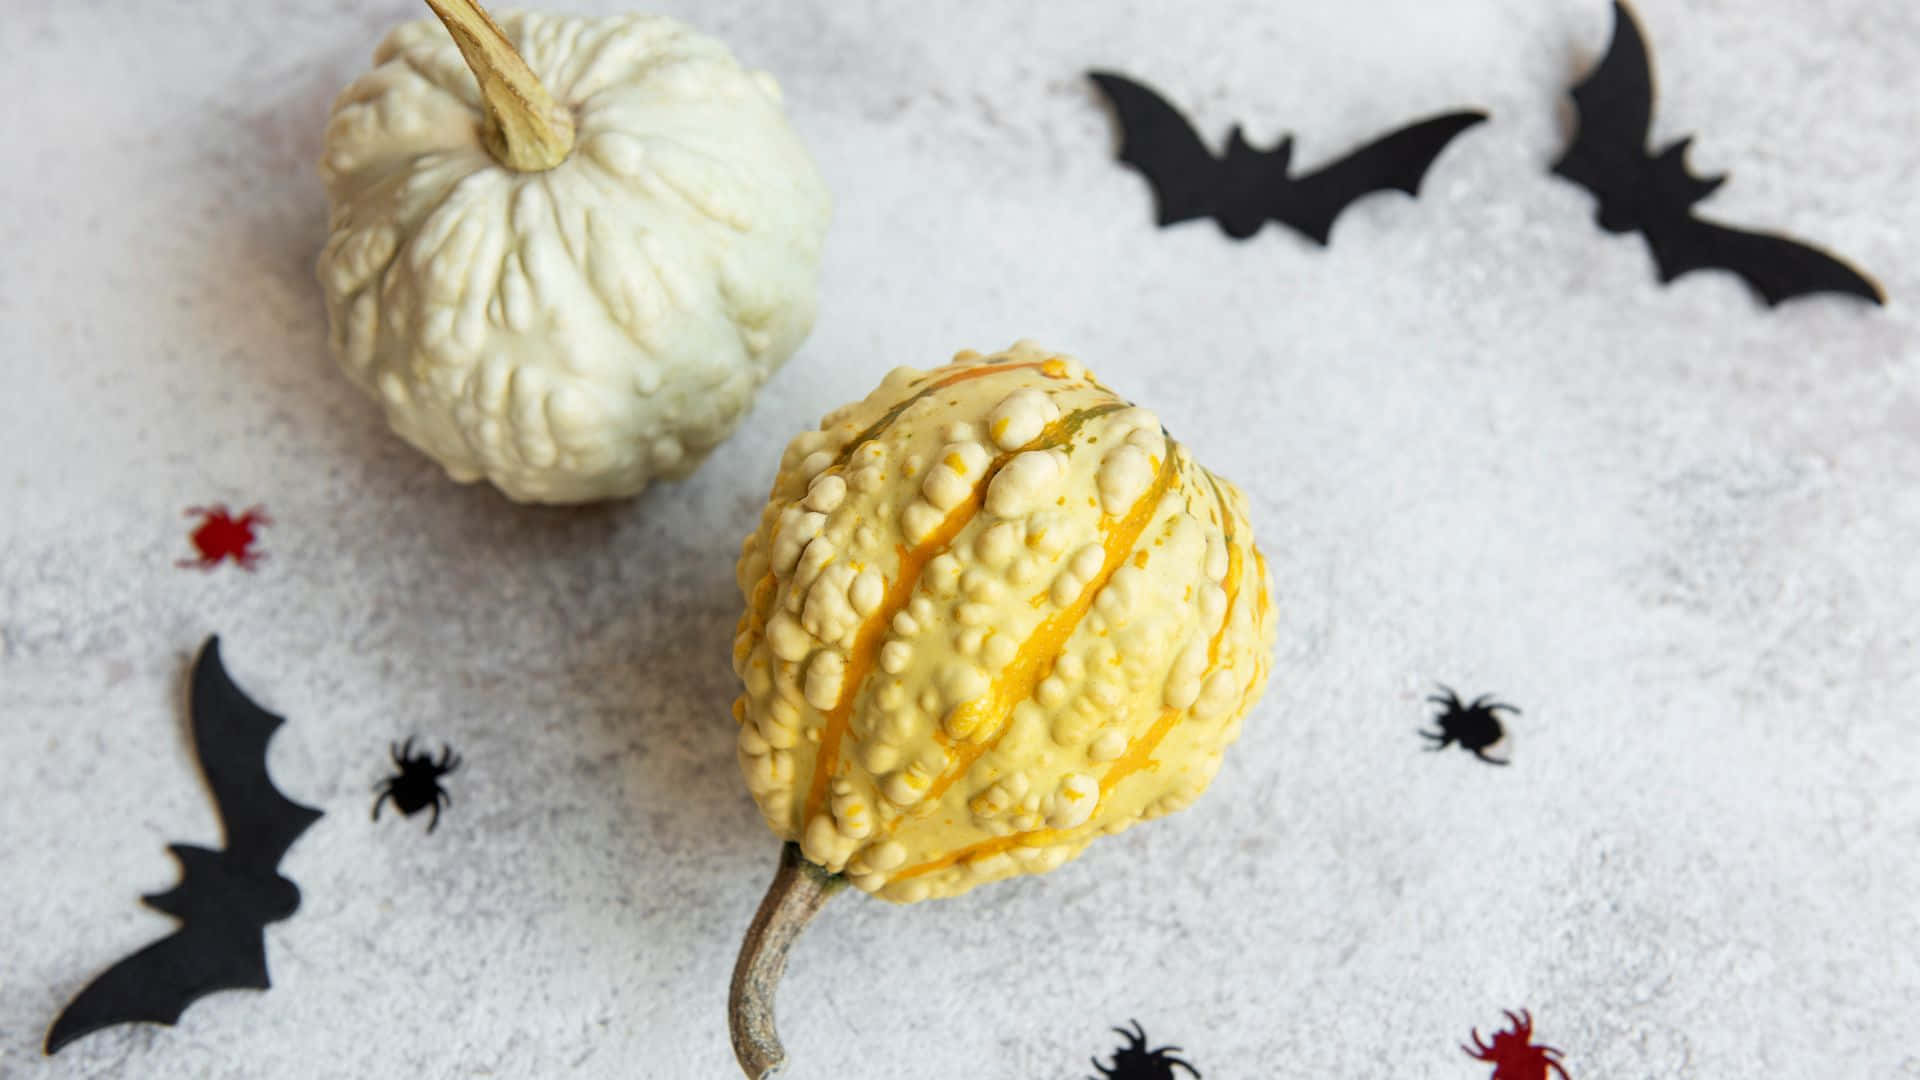 Get Ready for Trick-or-Treating With These Fun Homemade Halloween Crafts Wallpaper